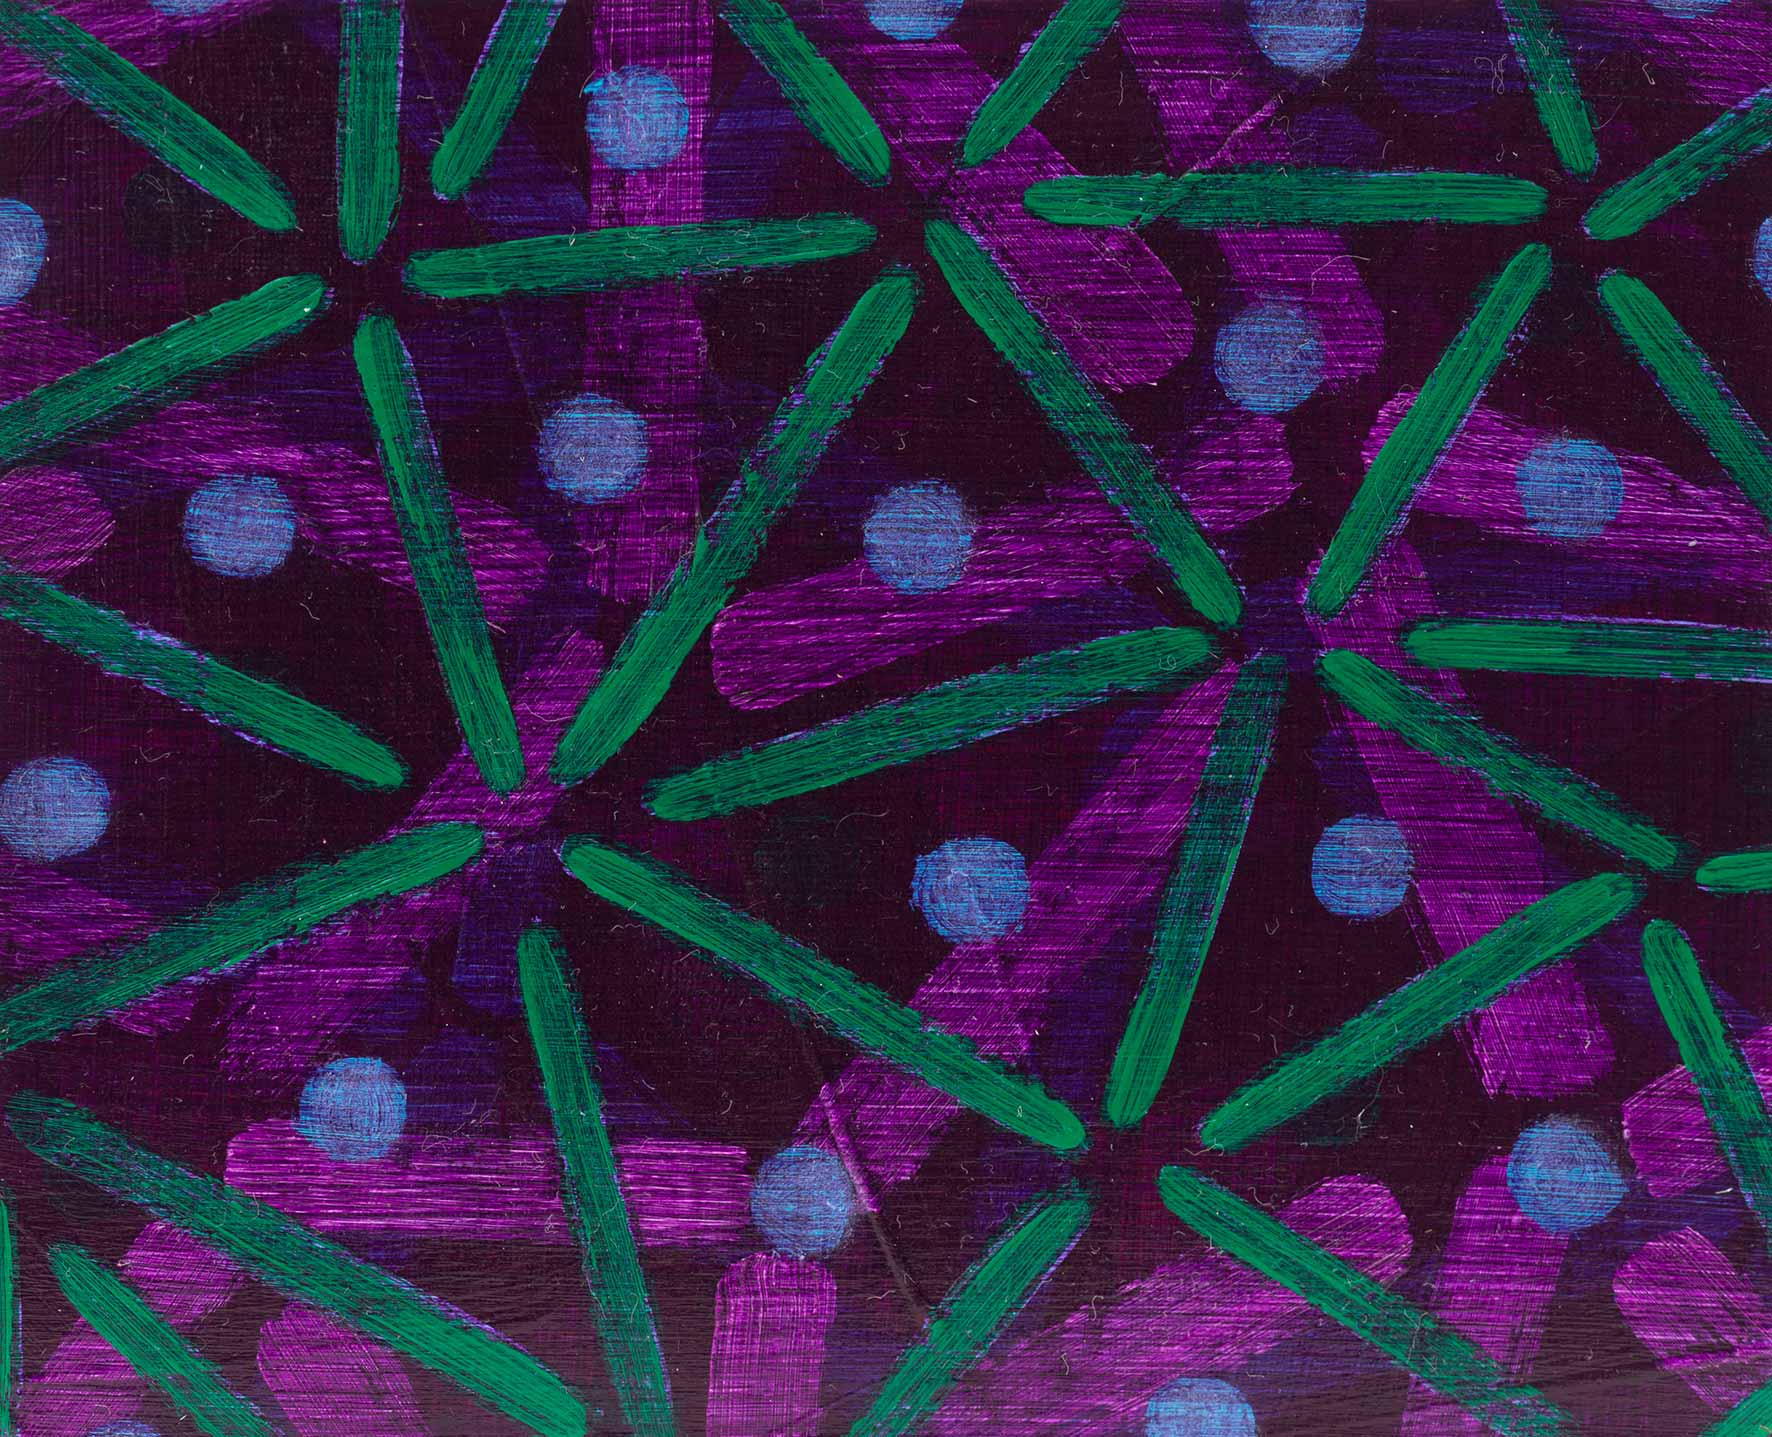 <p><strong>Graham Fletcher,</strong> <em>Untitled (Pattern 1),</em> 2019, acrylic on paper on plywood</p>